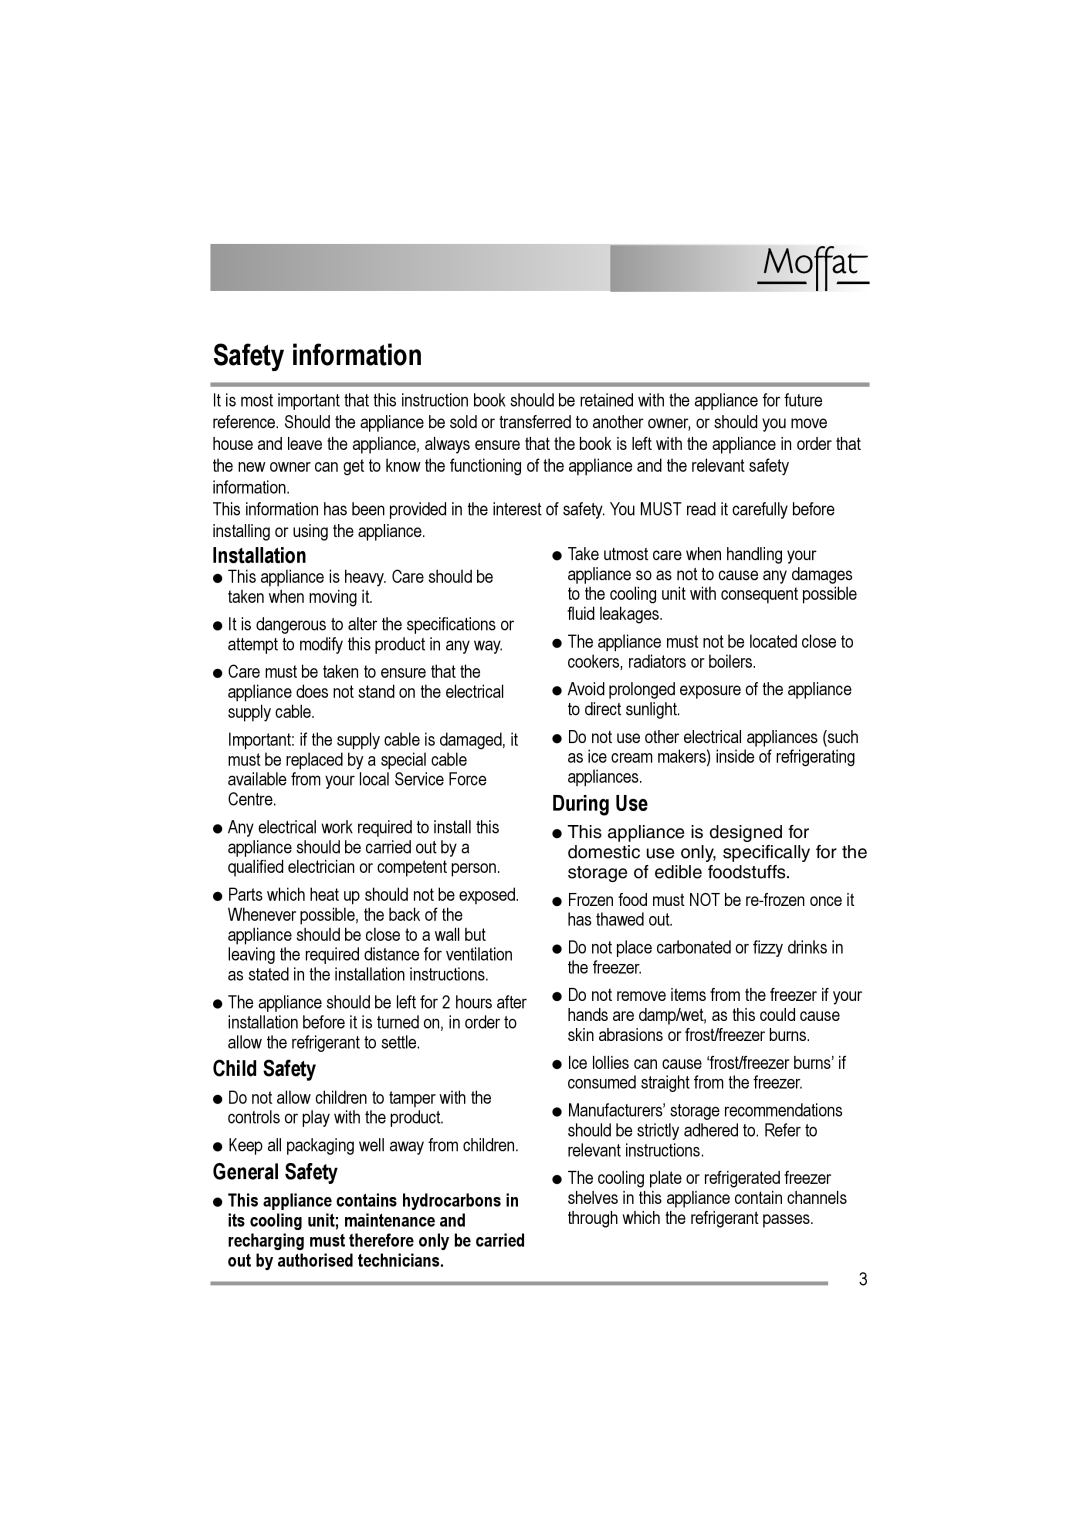 Moffat MUL 514 user manual Safety information, Installation, Child Safety, General Safety, During Use 